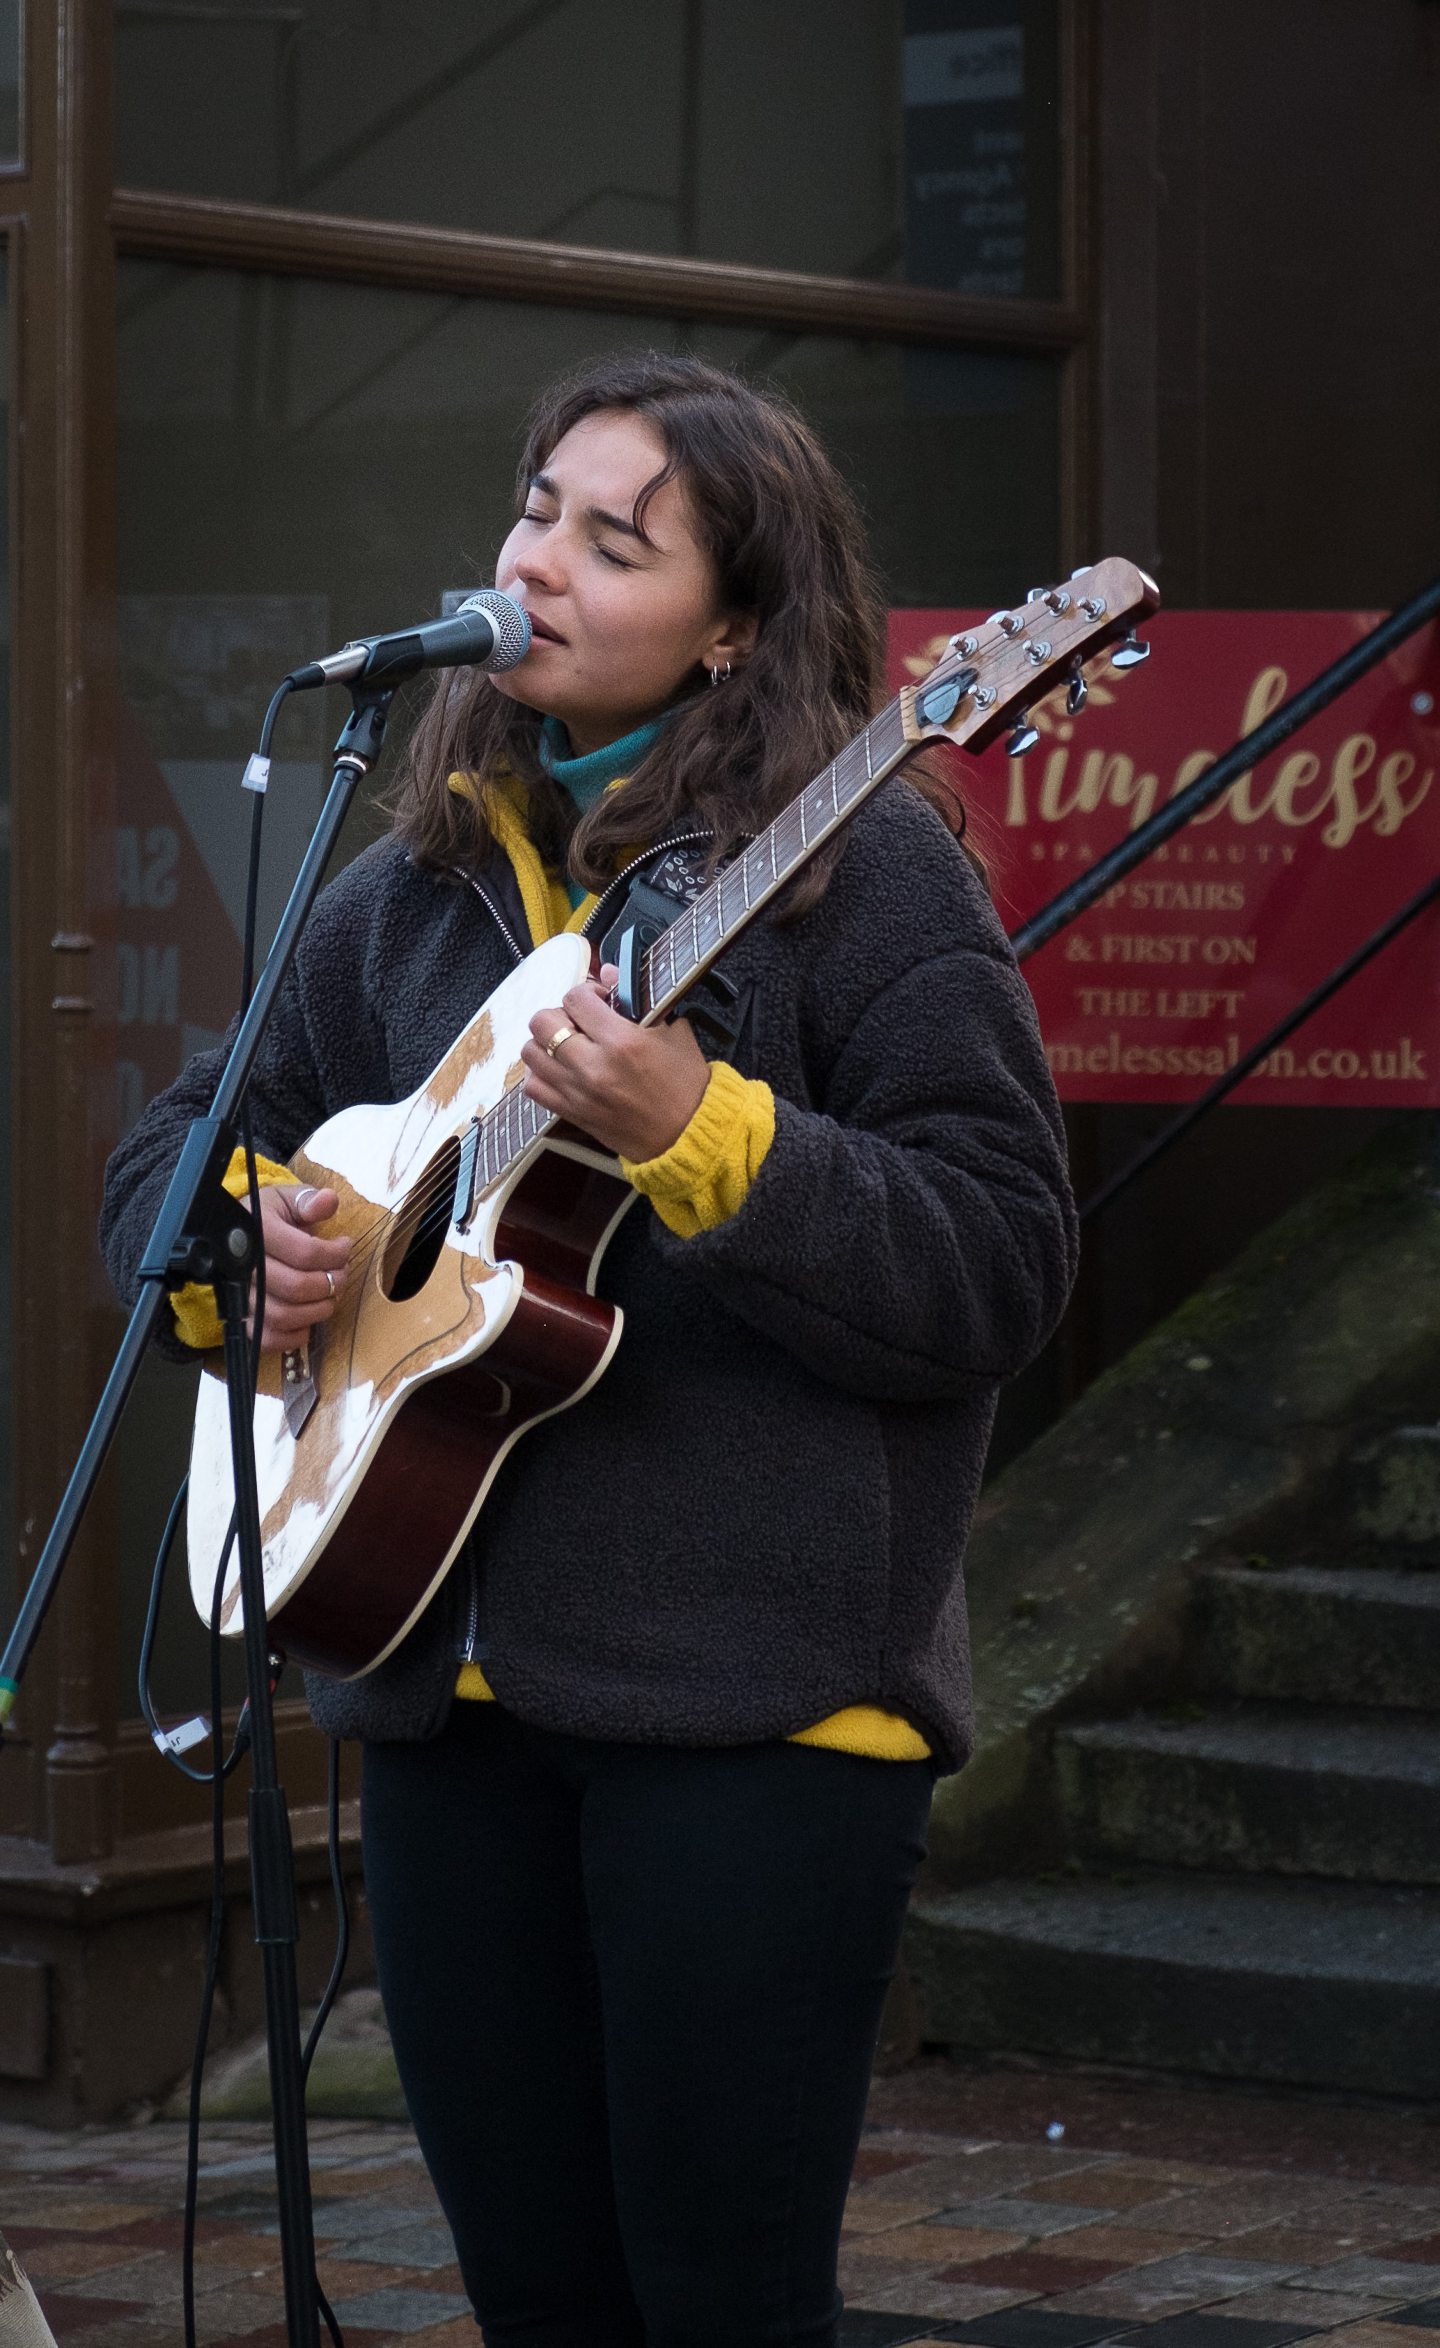 Cromarty singer Tamzene busking in Inverness as a teenager